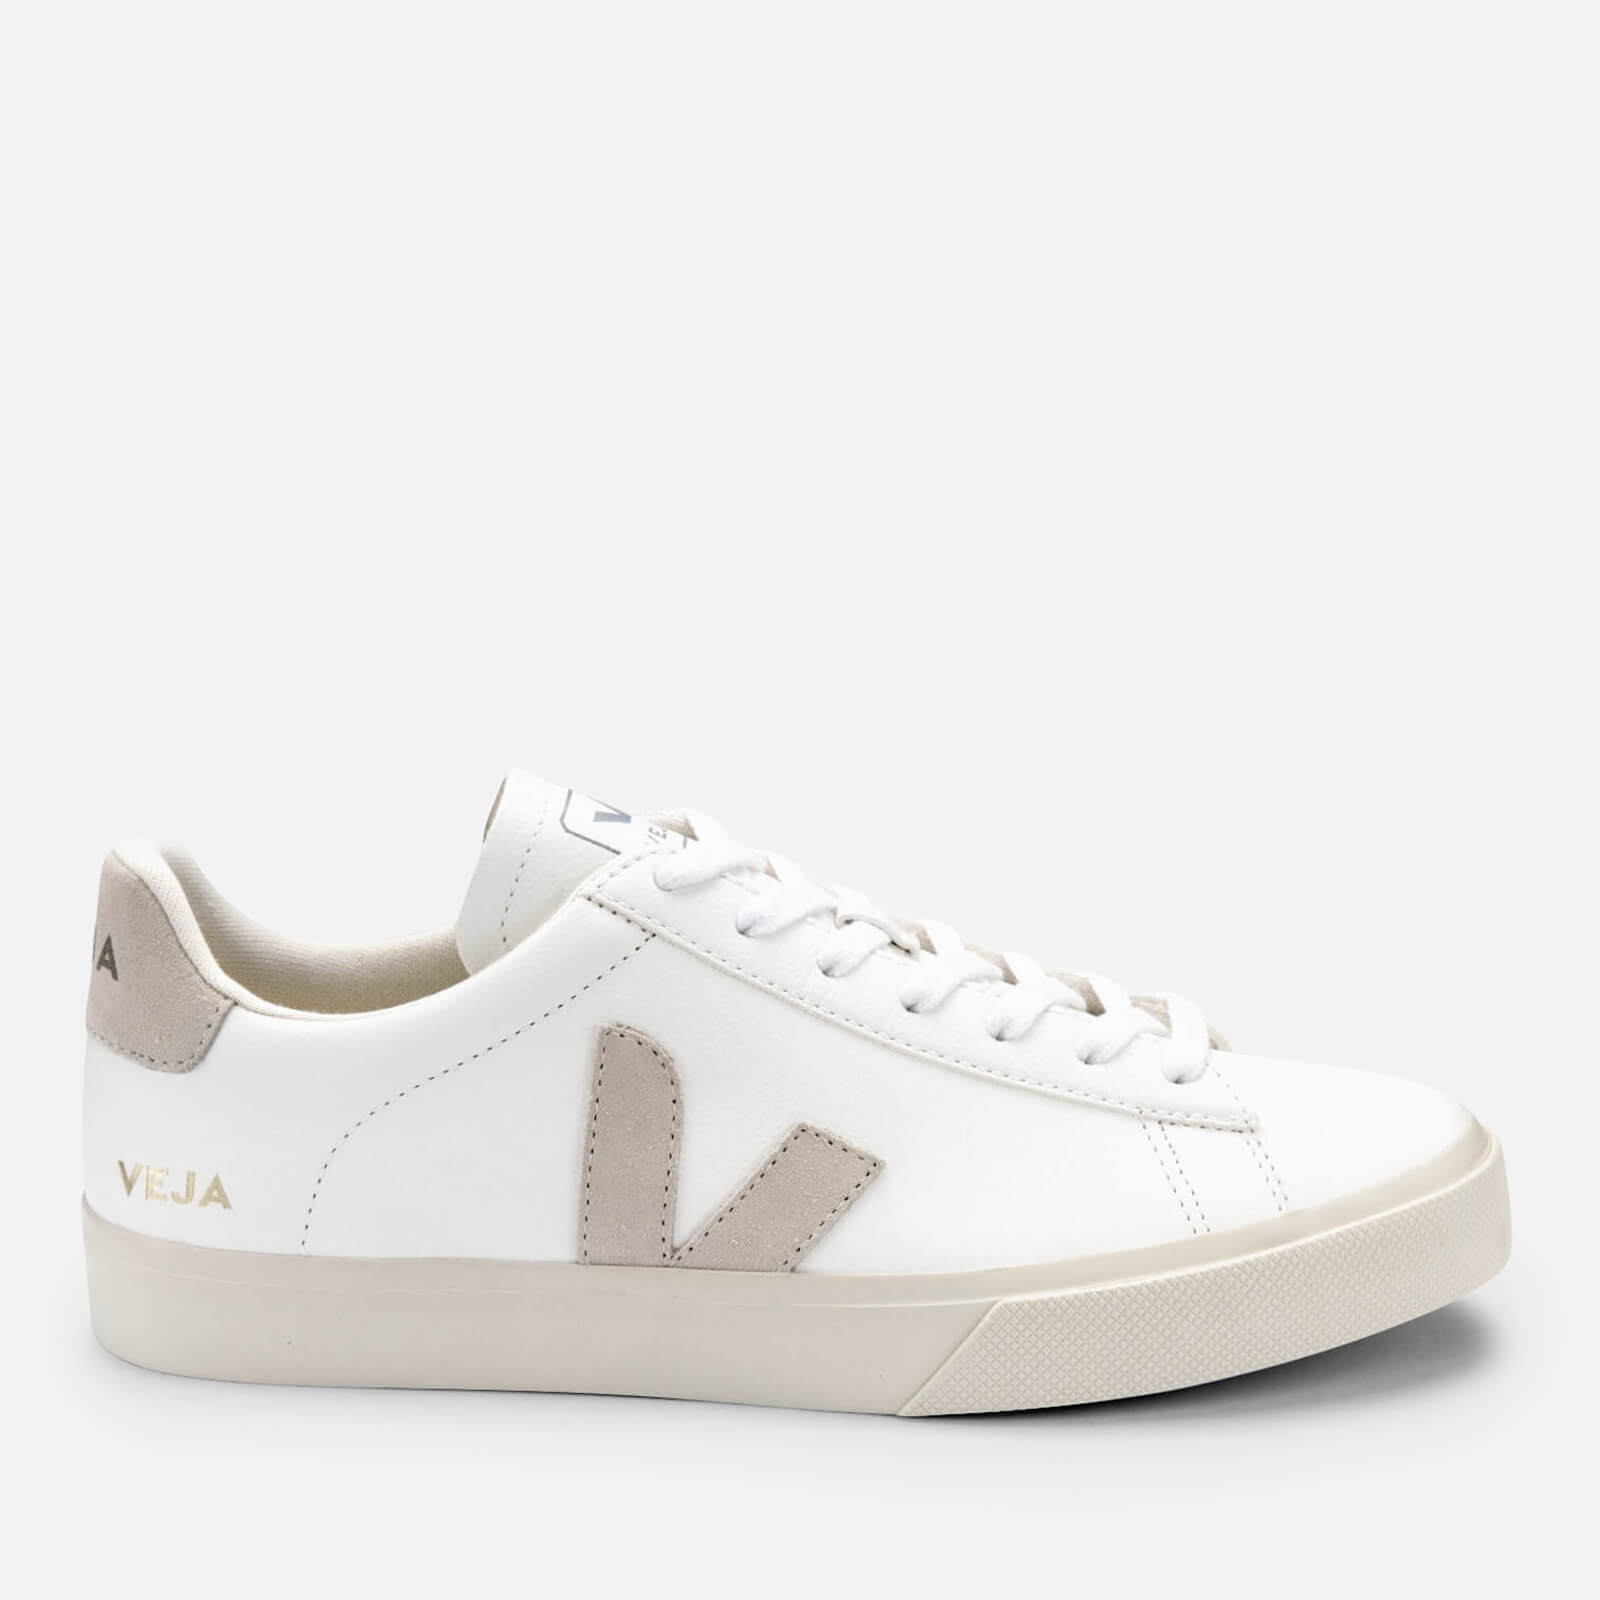 Veja Women's Campo Chrome Free Leather Trainers - Extra White/Natural - UK 2